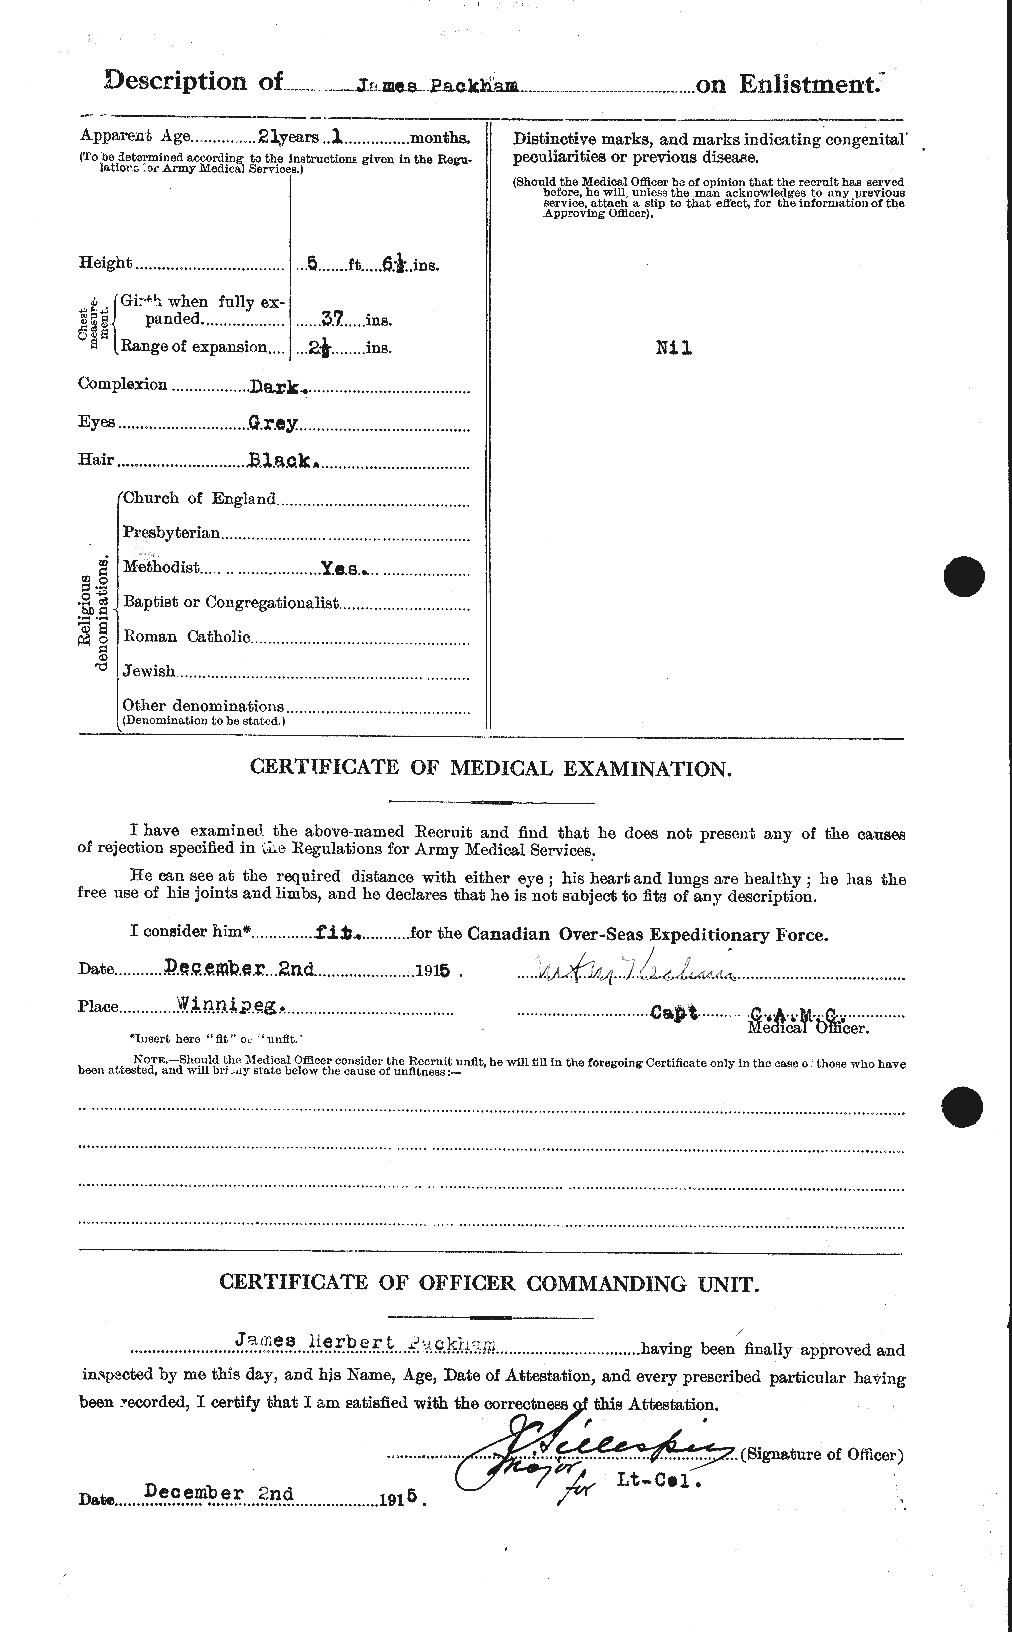 Personnel Records of the First World War - CEF 561823b